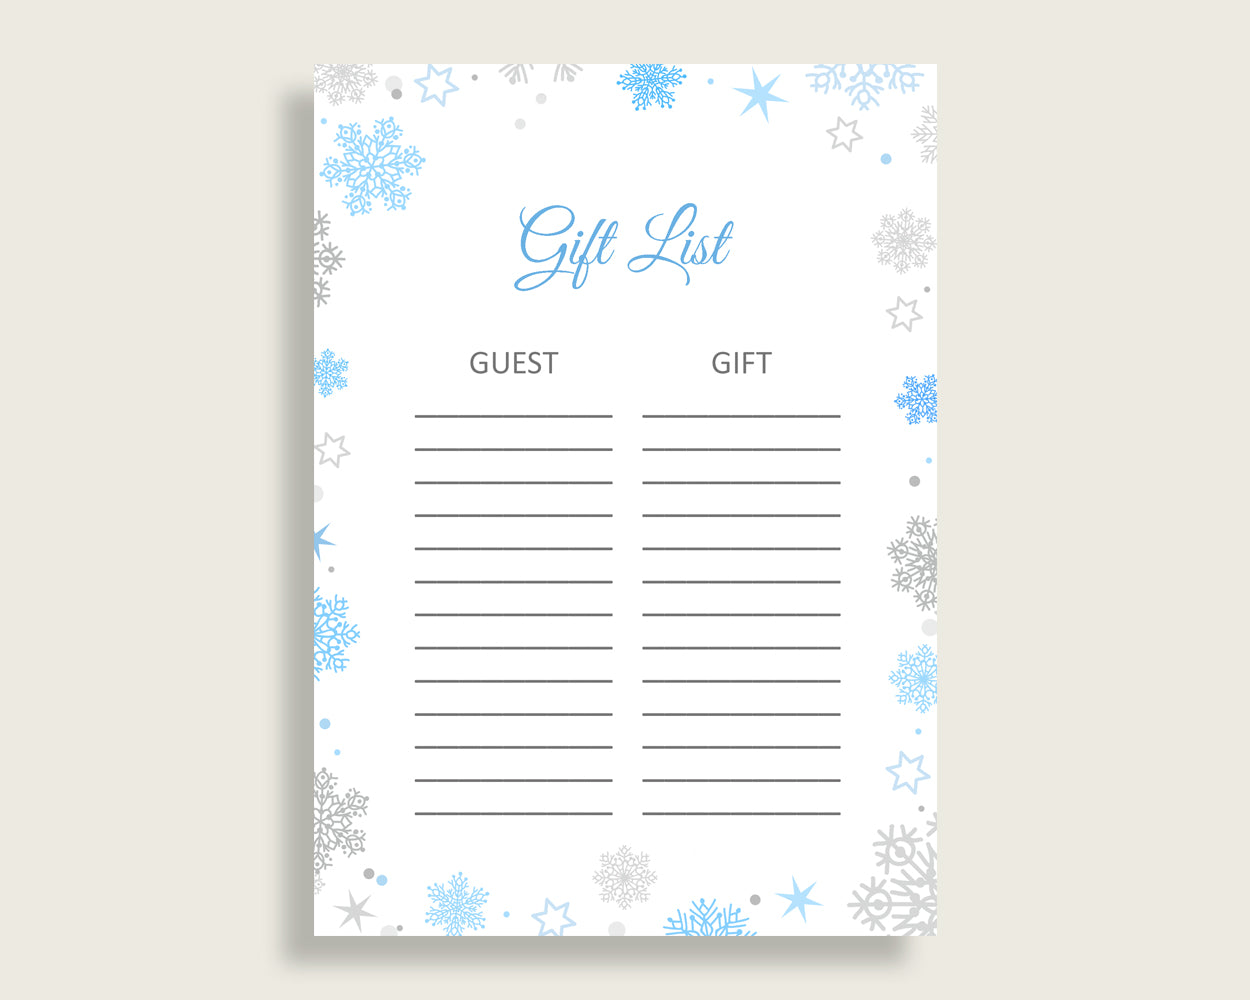 Gift List Baby Shower Gift List Snowflake Baby Shower Gift List Blue Gray Baby Shower Snowflake Gift List instant download prints NL77H